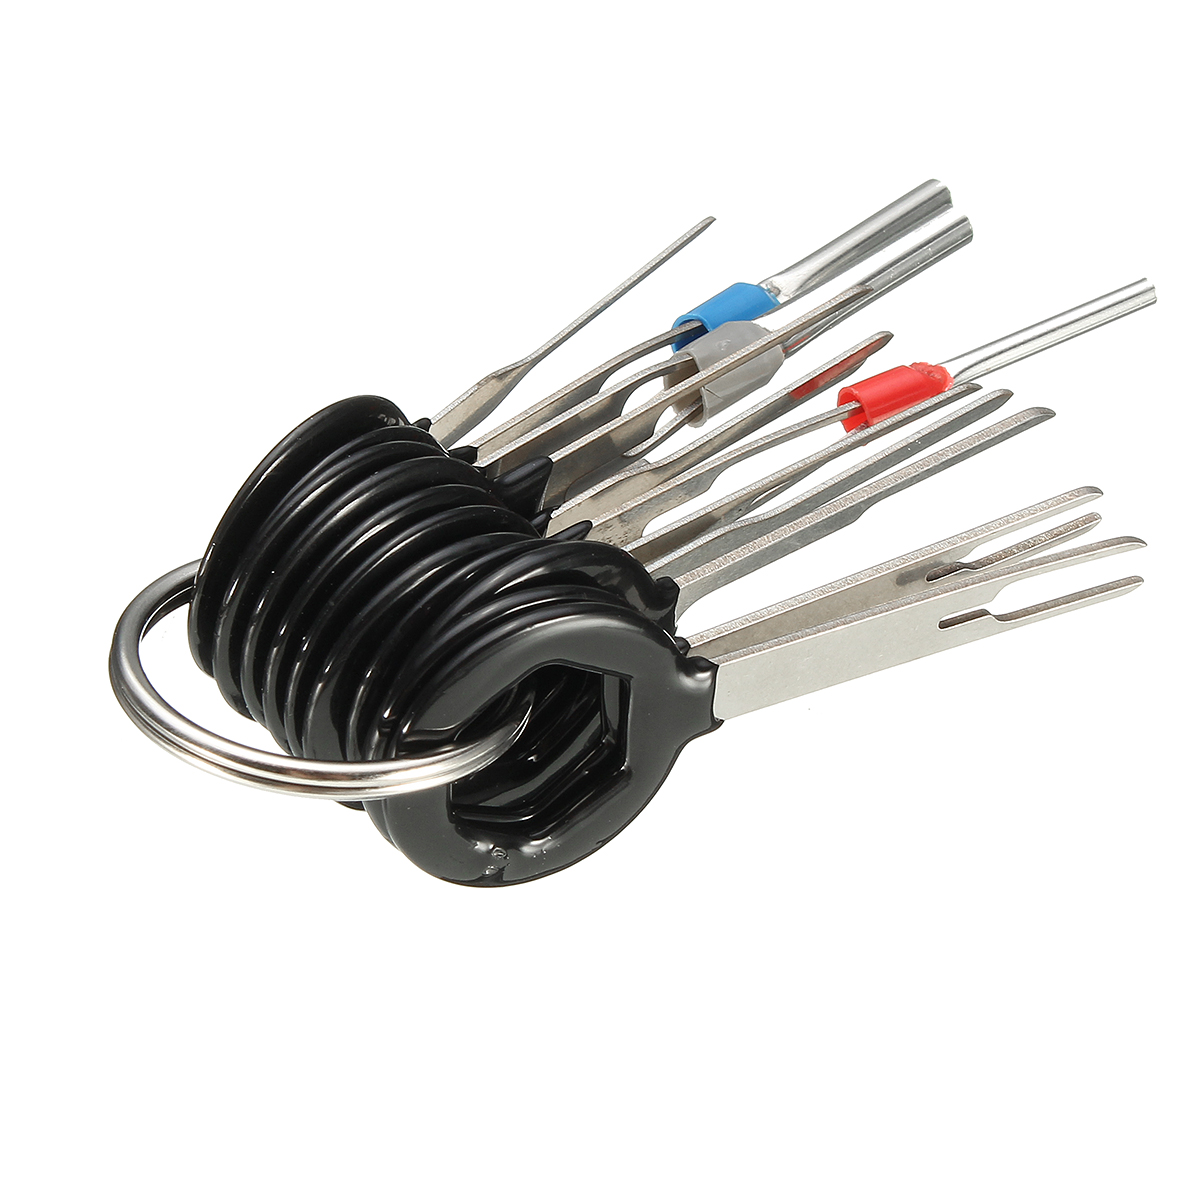 Excellwayreg-11Pcs-Terminal-Removal-Tool-Kit-Wiring-Connector-Pin-Release-Extractor-1179384-3